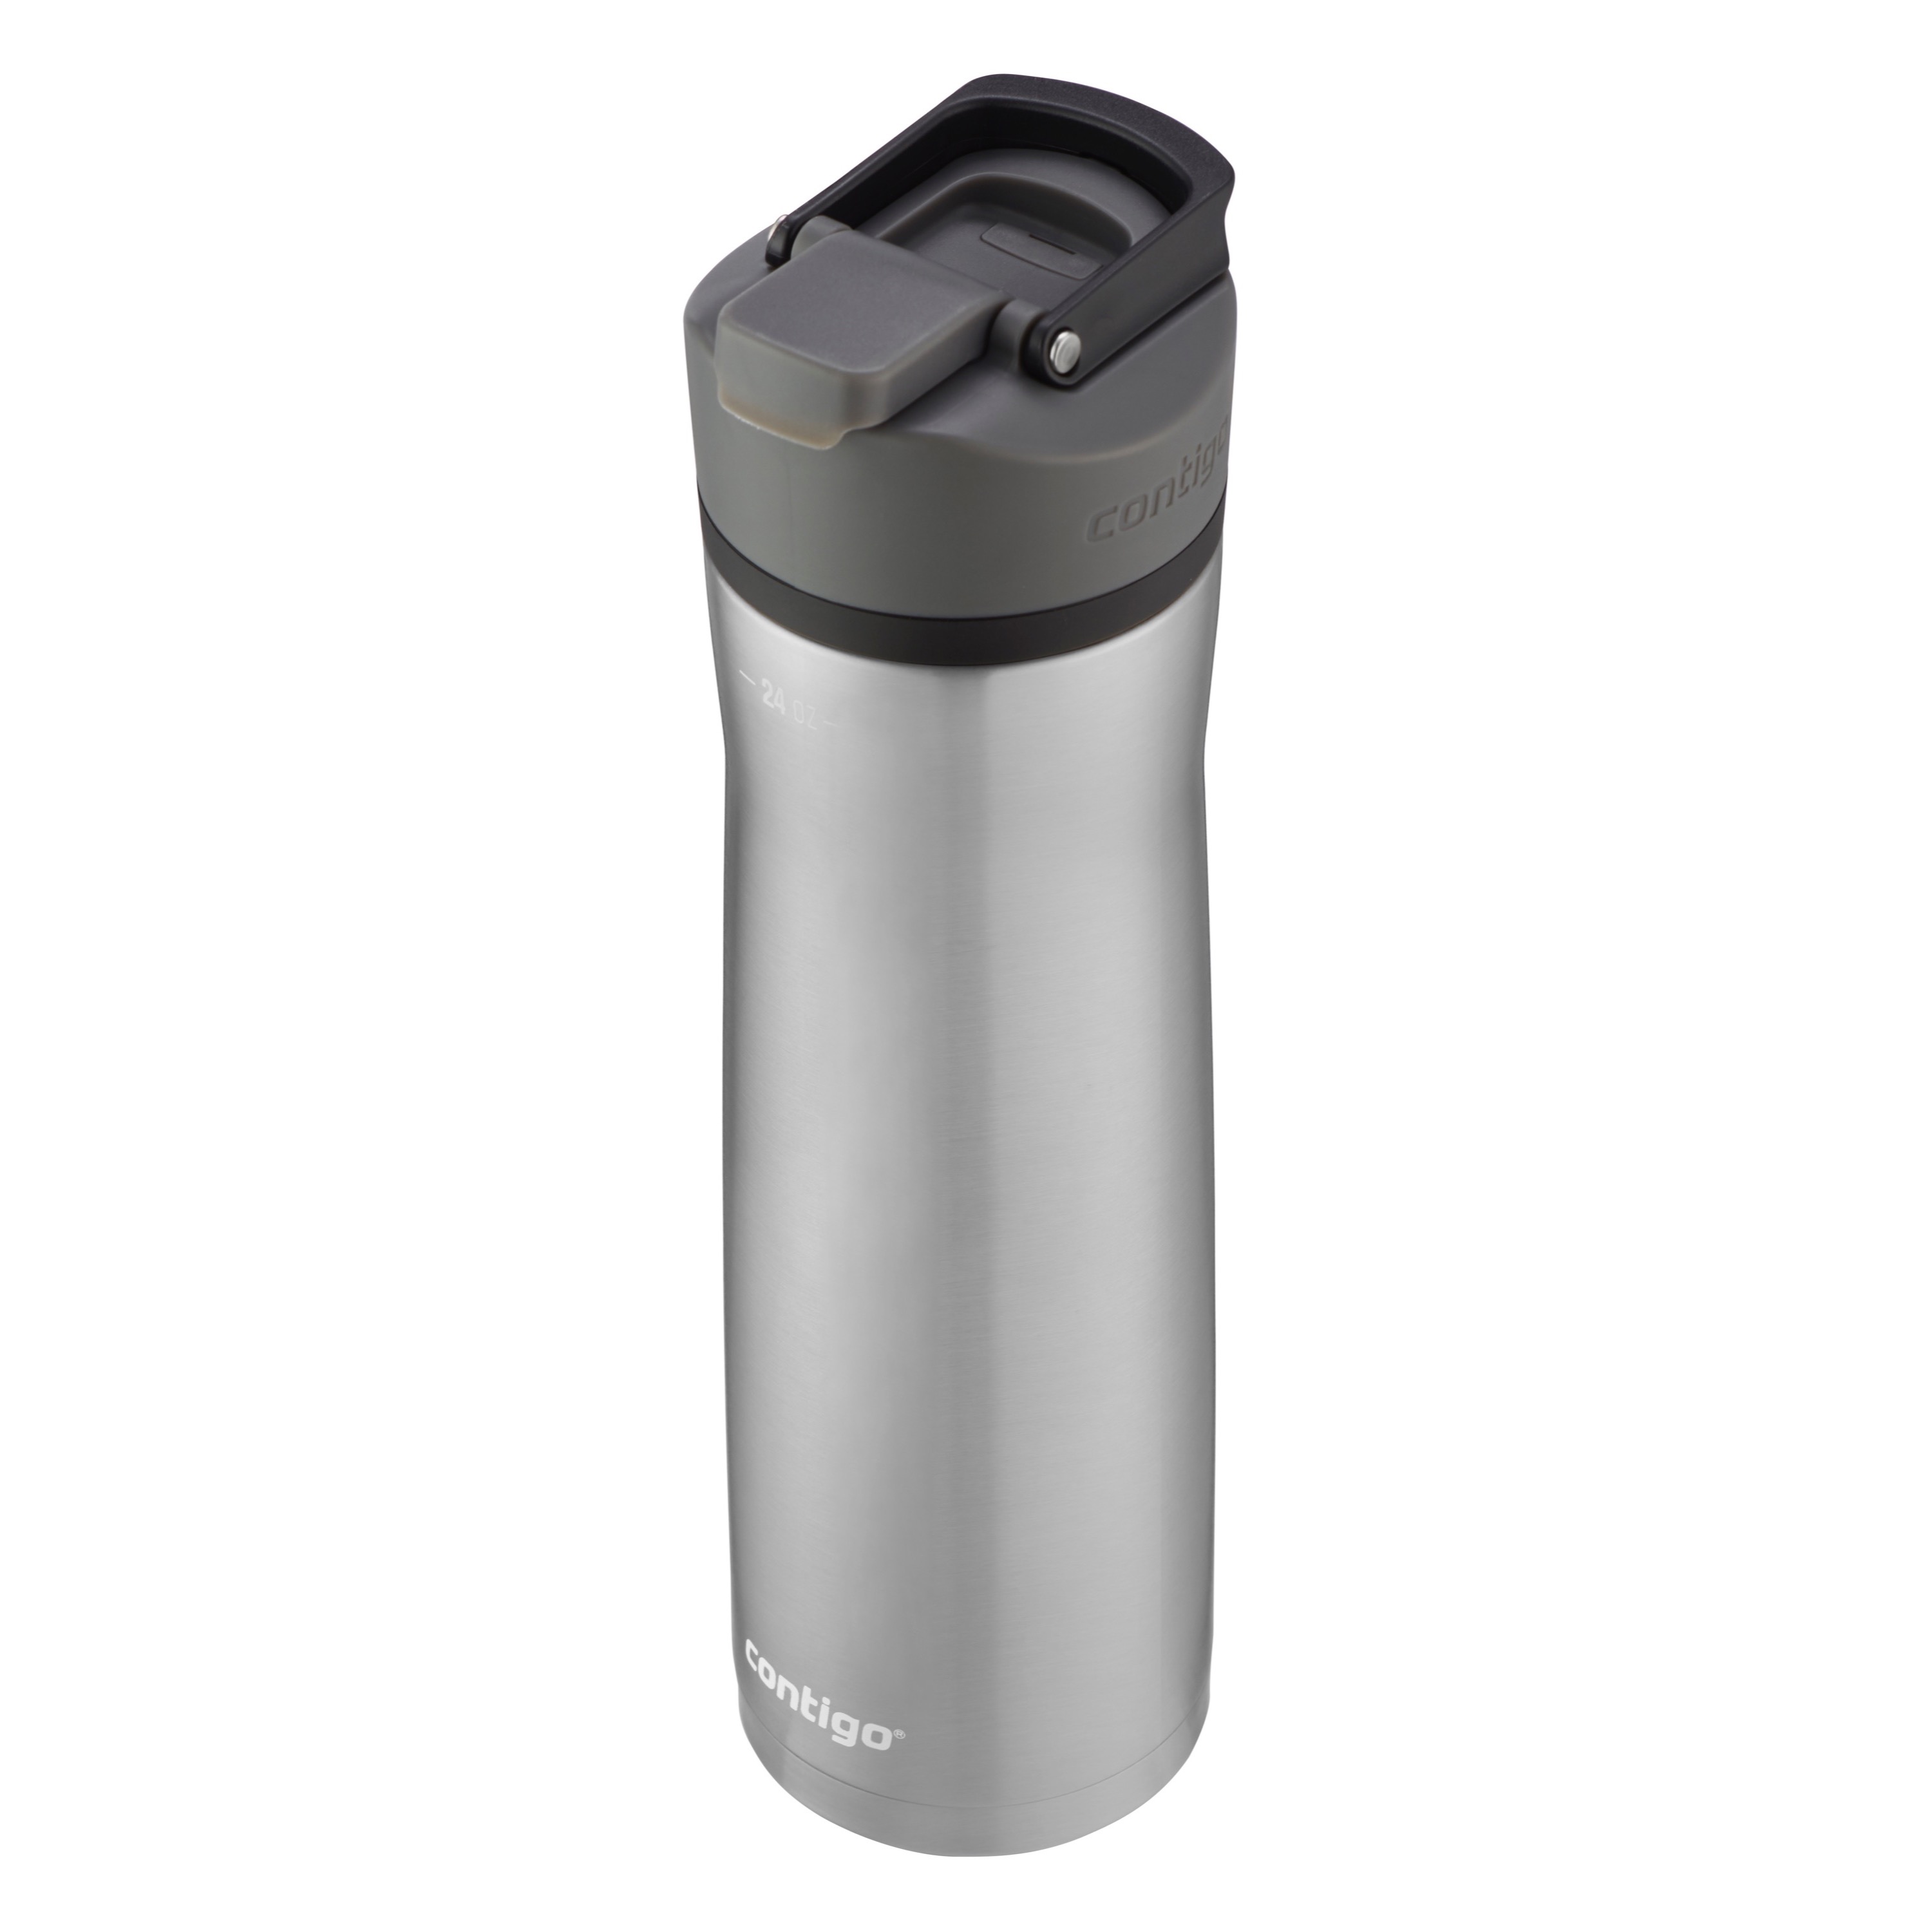 Contigo Cortland Chill 2.0 24 oz Silver, Gray and Licorice Solid Print Double Wall Vacuum Insulated Stainless Steel Water Bottle with Wide Mouth Lid - image 3 of 9